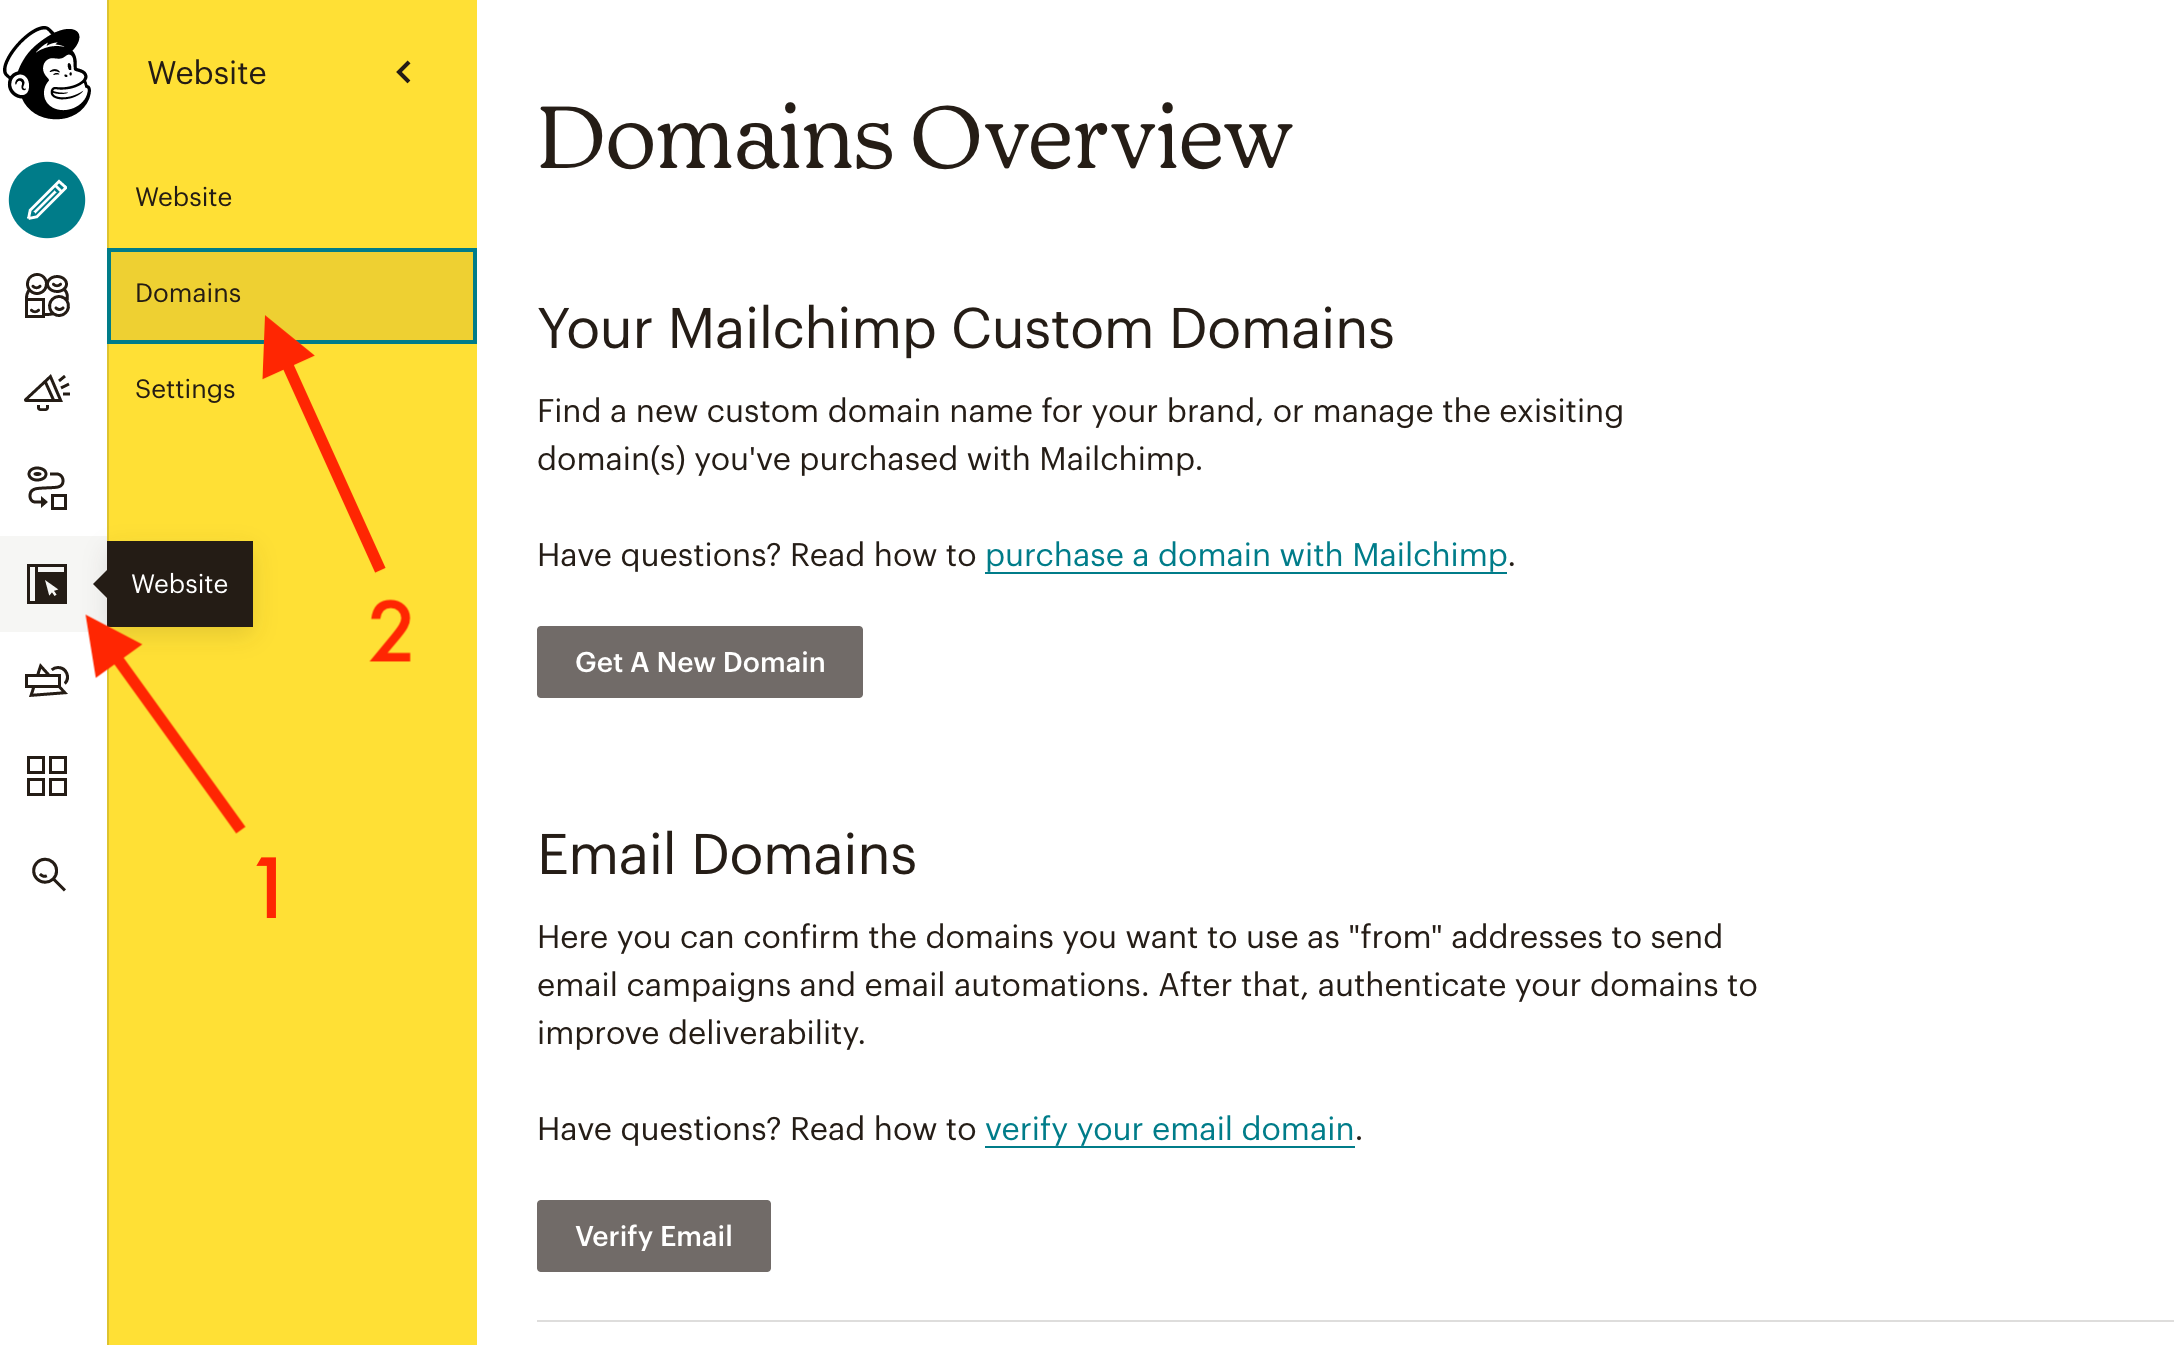 Verify your Domain in Mailchimp